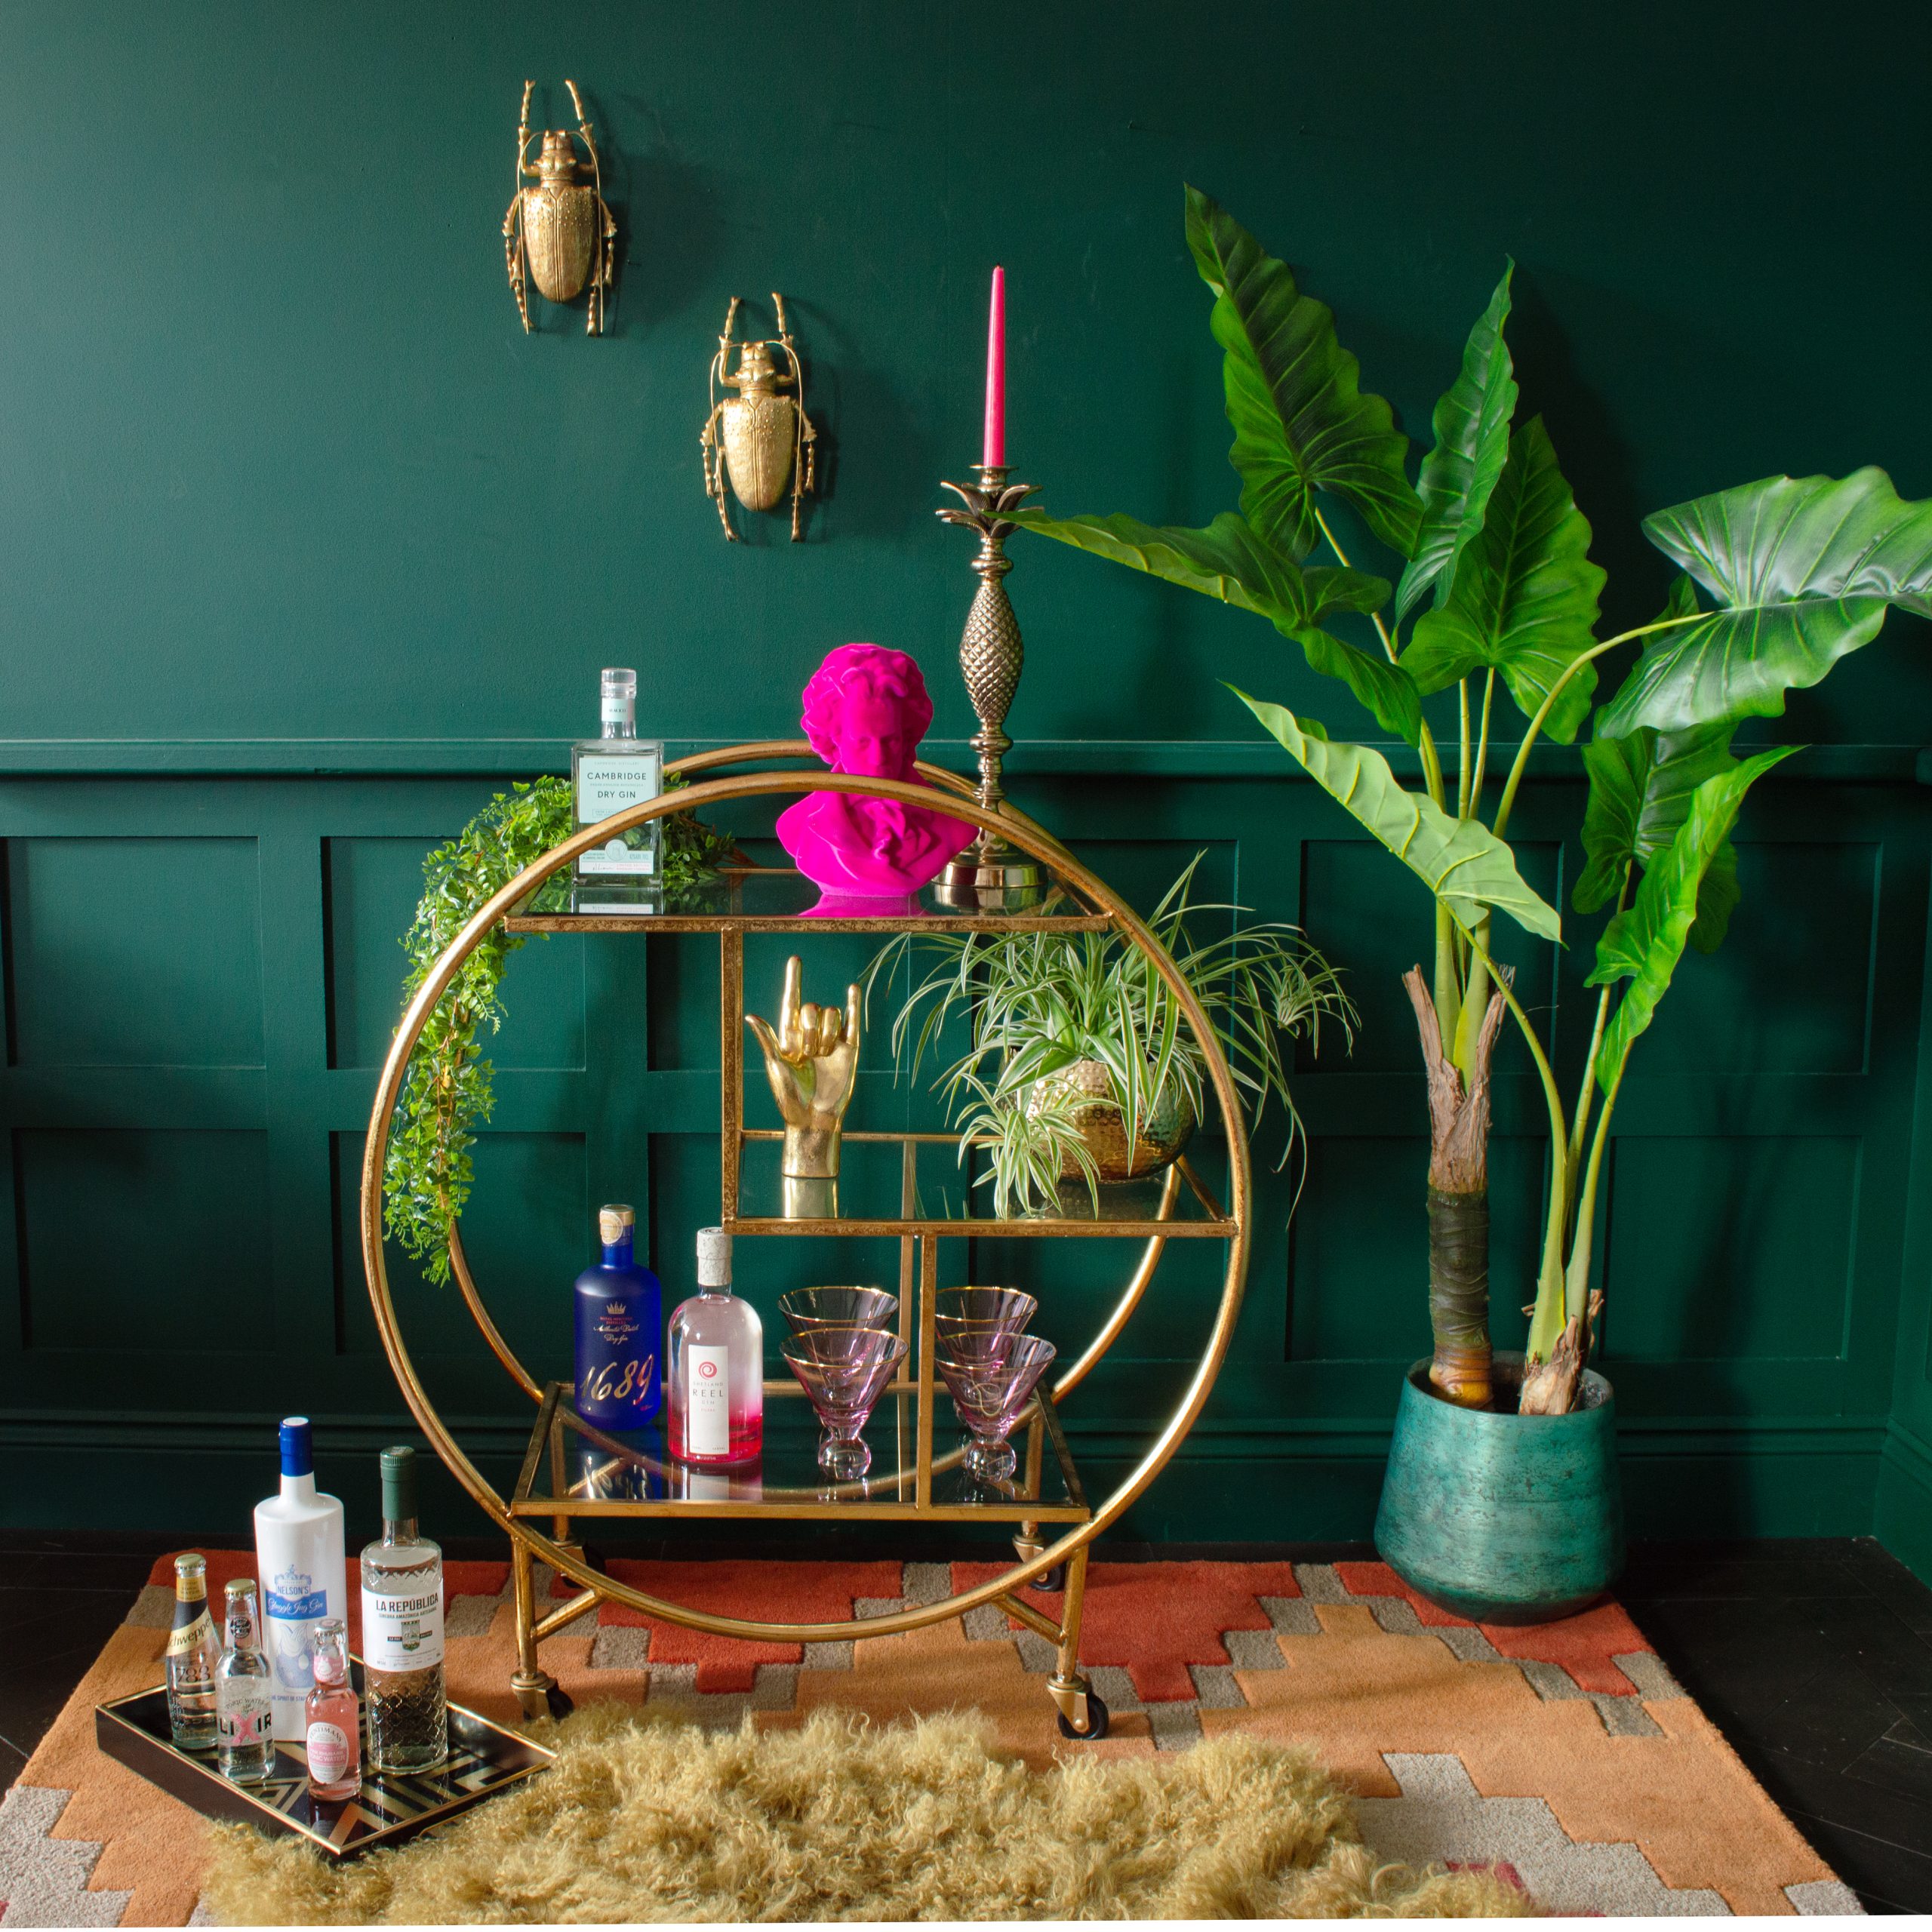 Styling tips for your drinks trolley - Add plenty of plants, unusual glassware, decorative alcohol bottles and quirky beetle wall decor.